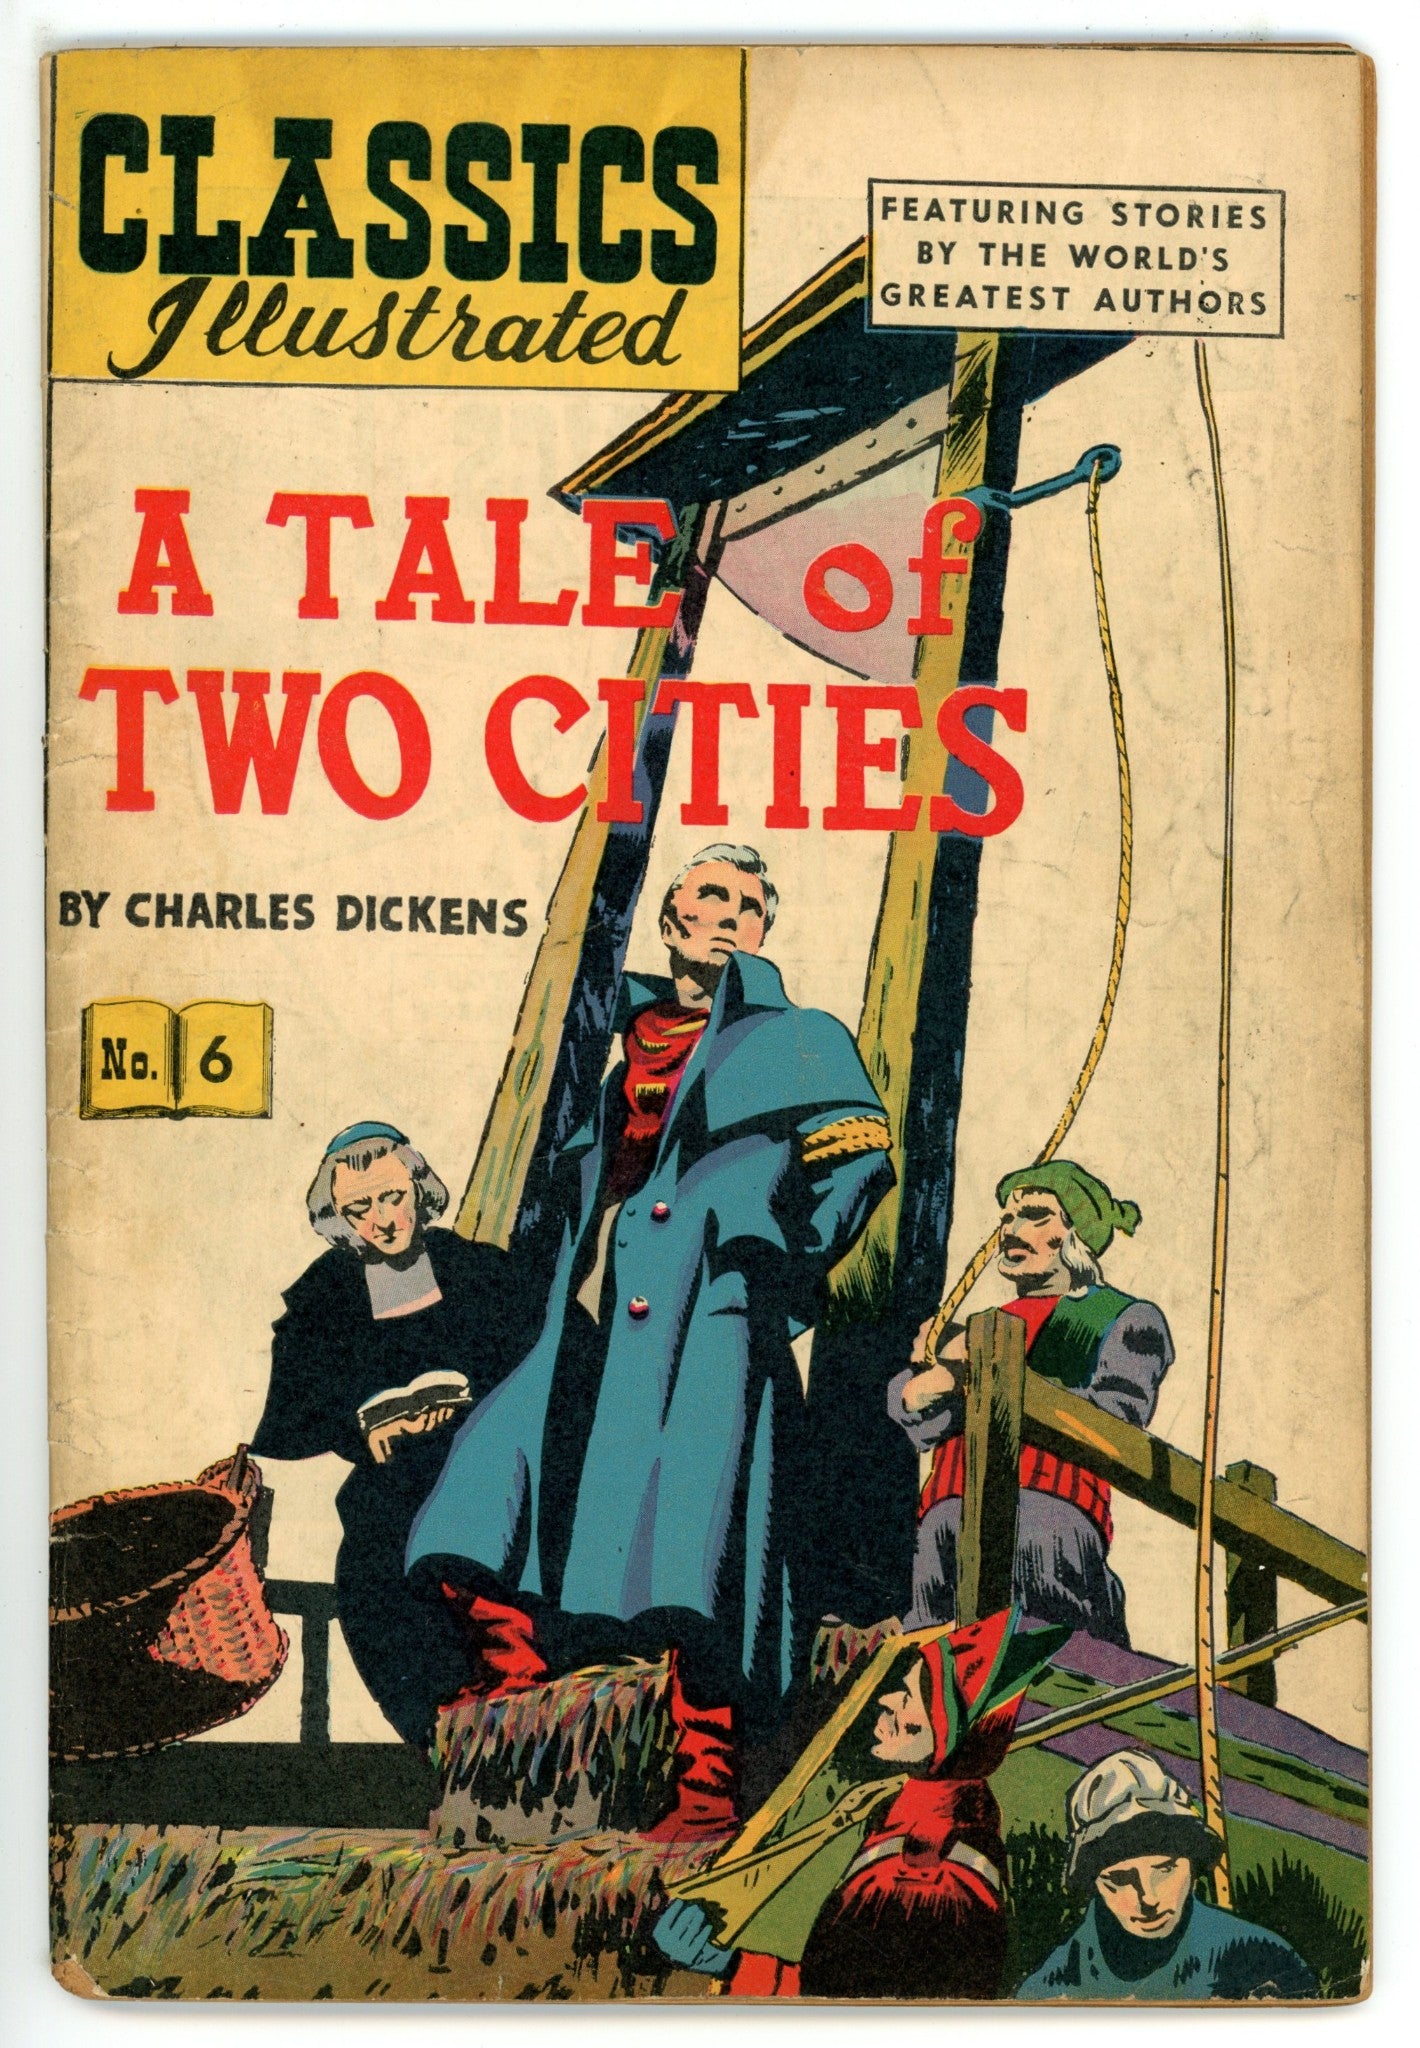 Classics Illustrated: A Tales of Two Cities 6 Hrn 51 VG (1948)